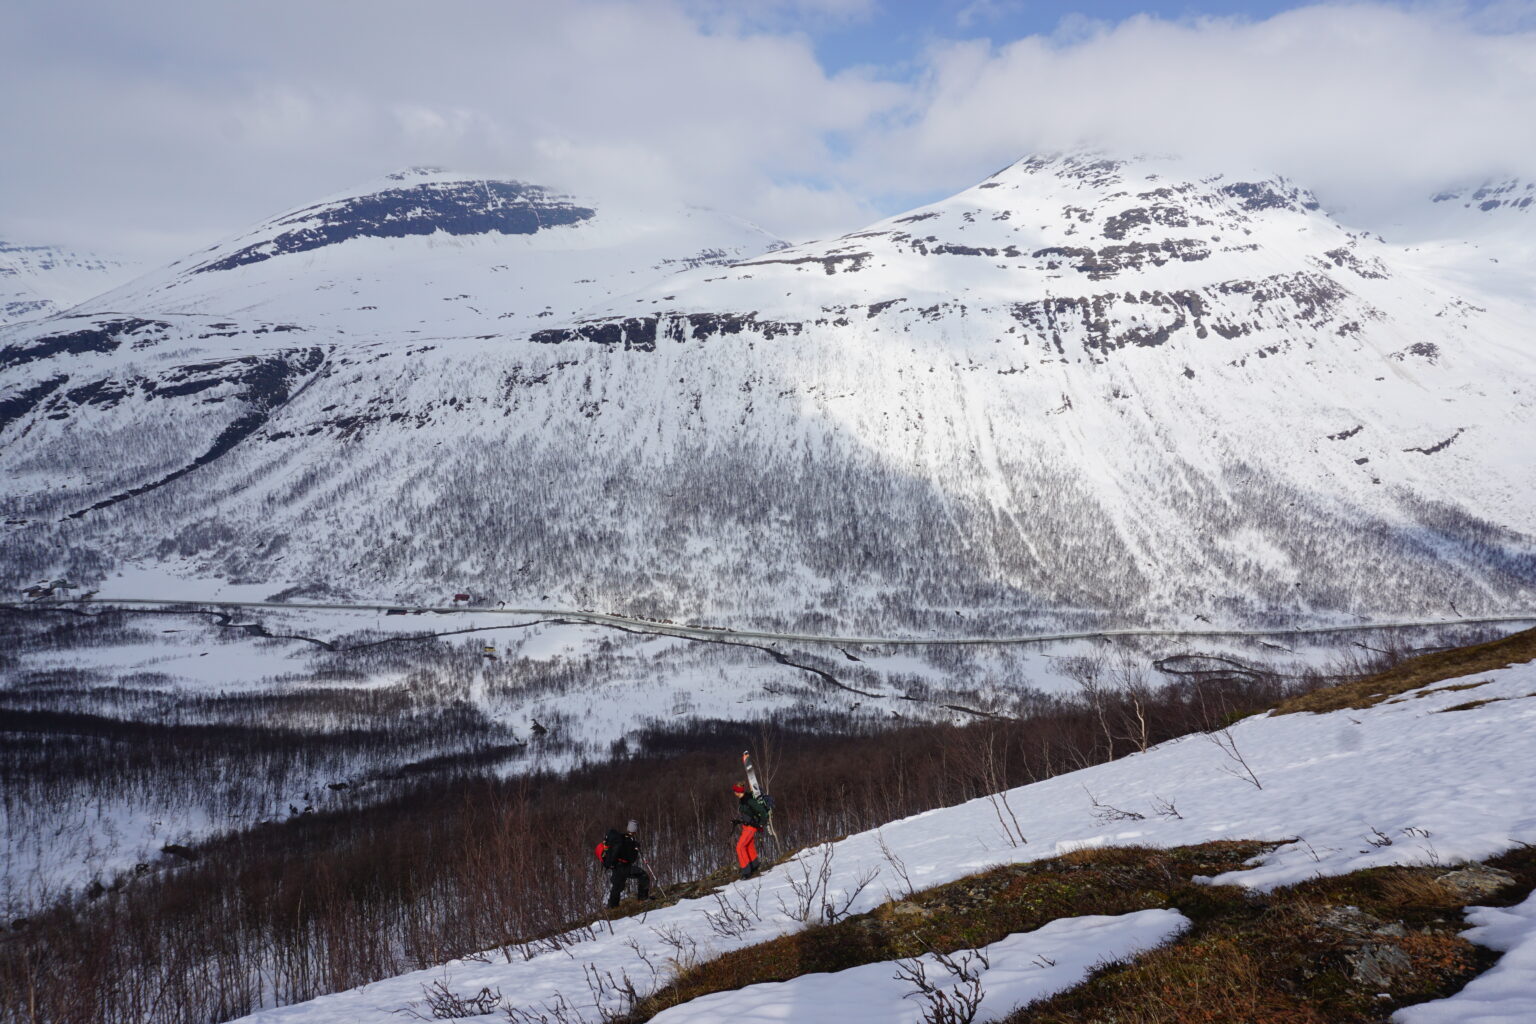 Hiking up to the Kitchen Chute with the Tamokdalen Backcountry in the distance